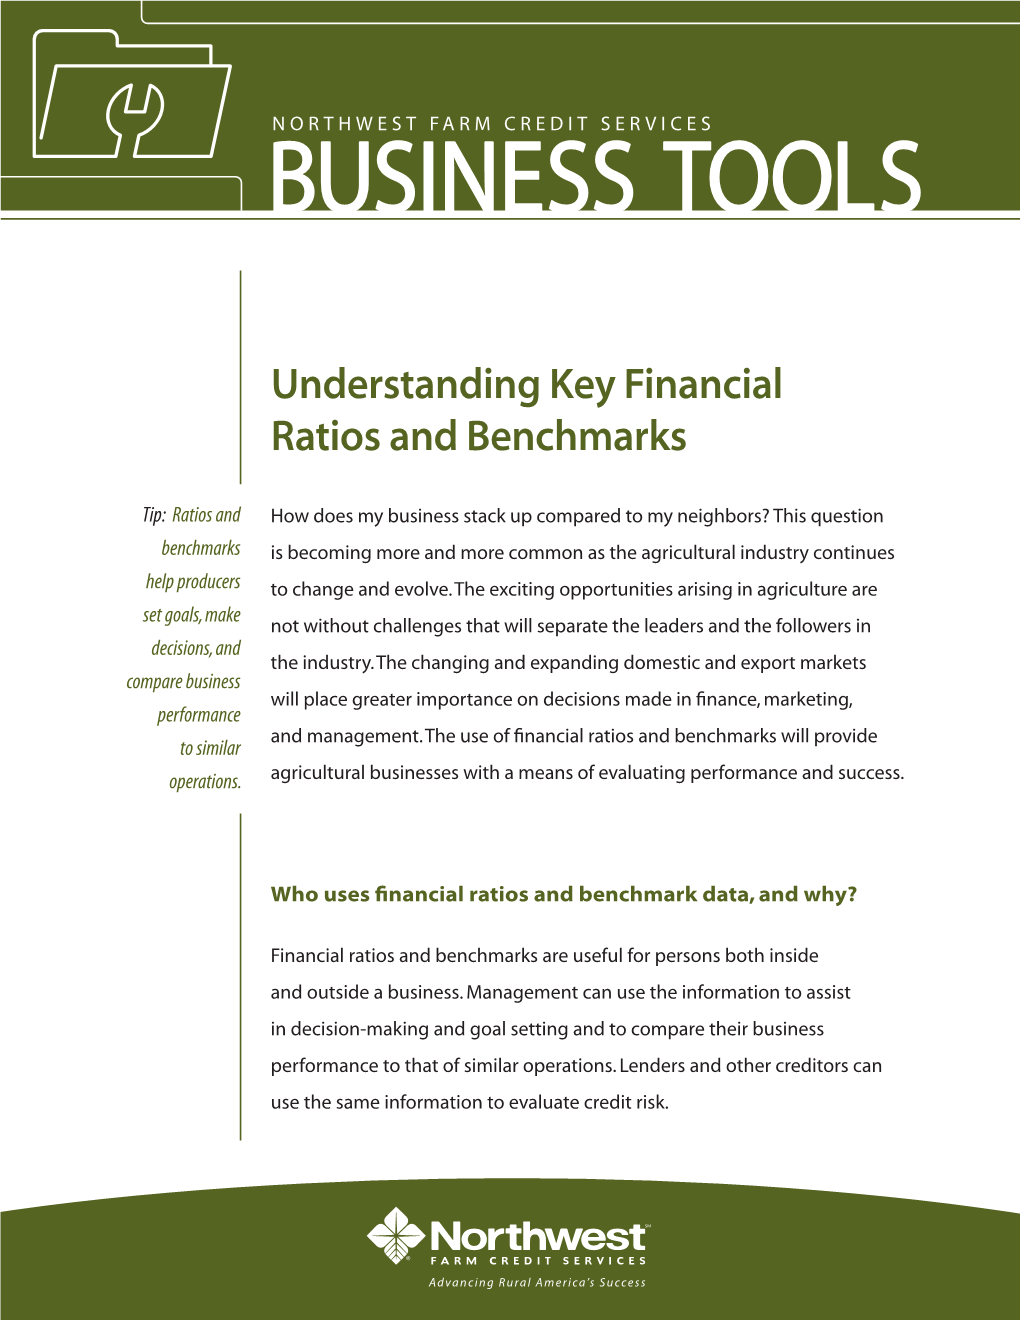 Understanding Key Financial Ratios and Benchmarks